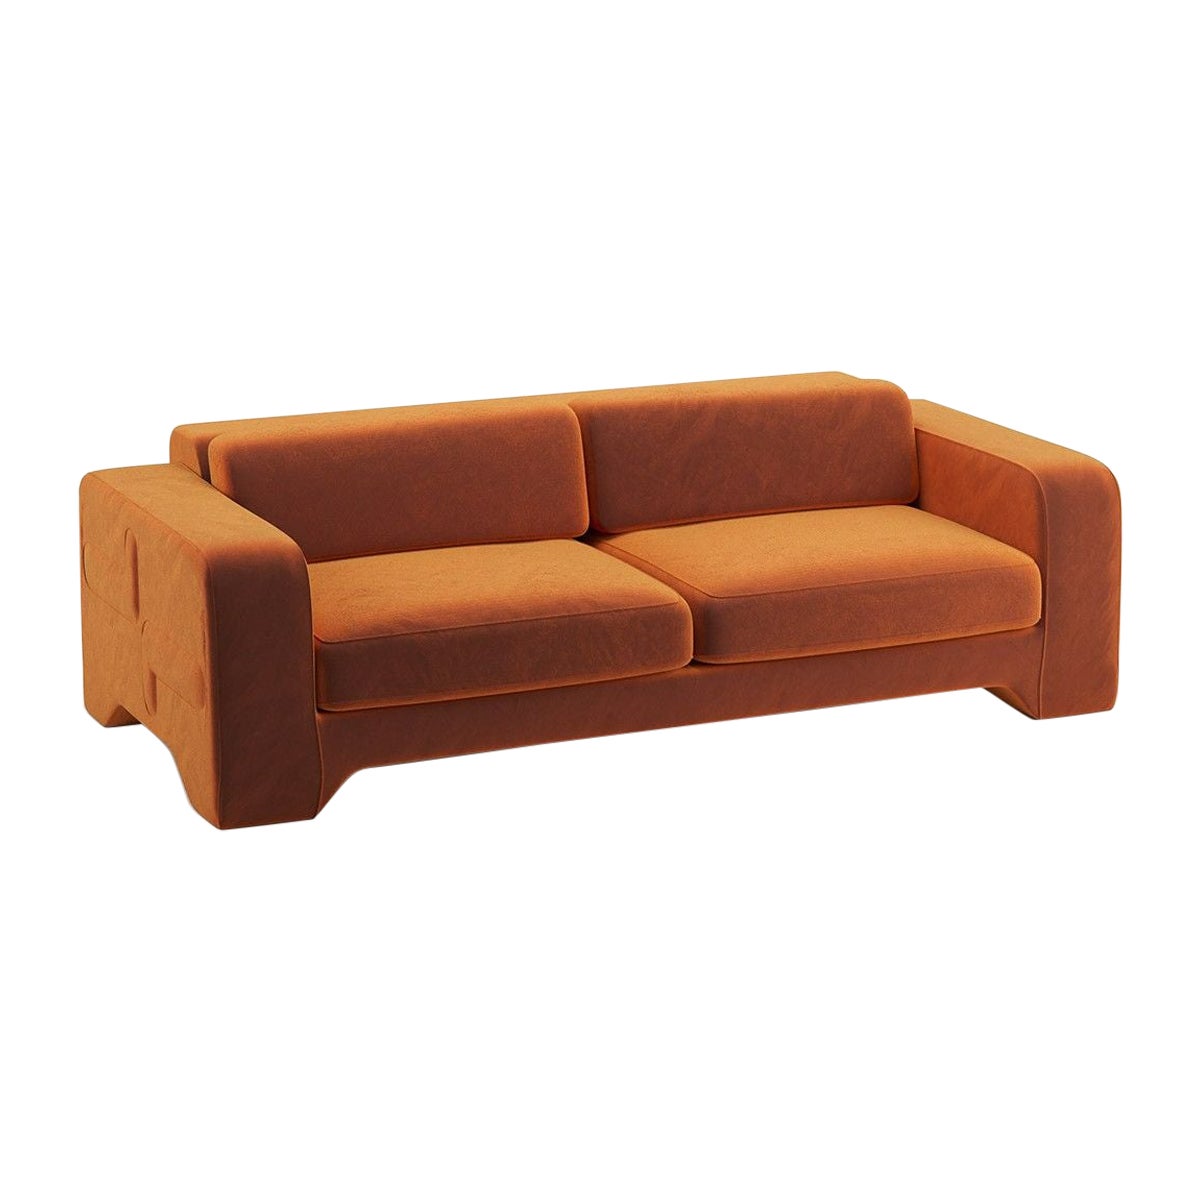 Popus Editions Giovanna 4 Seater Sofa in Amber Como Velvet Upholstery For Sale